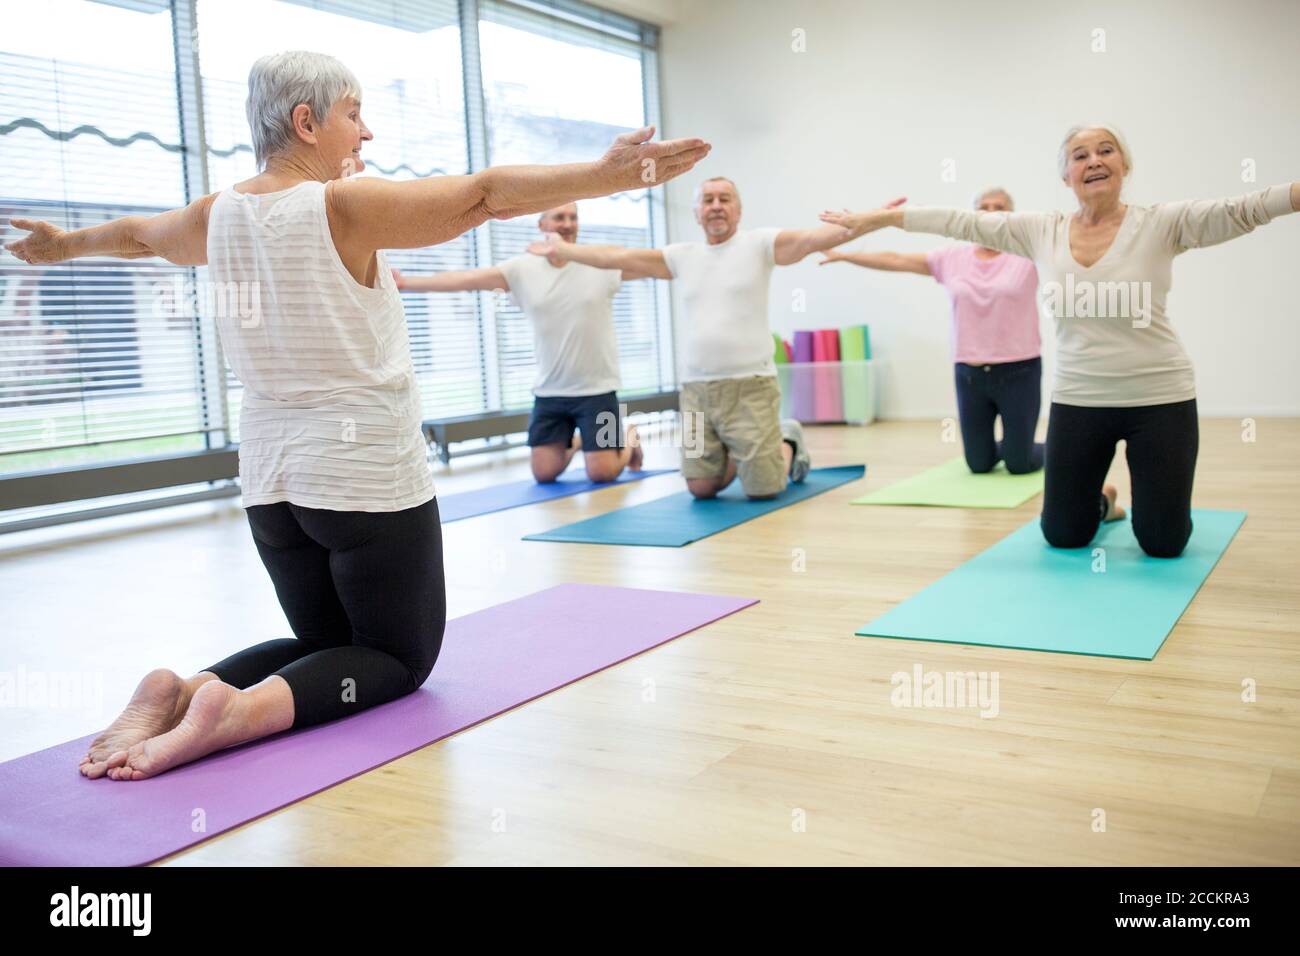 Group of active seniors practicing yoga together Stock Photo